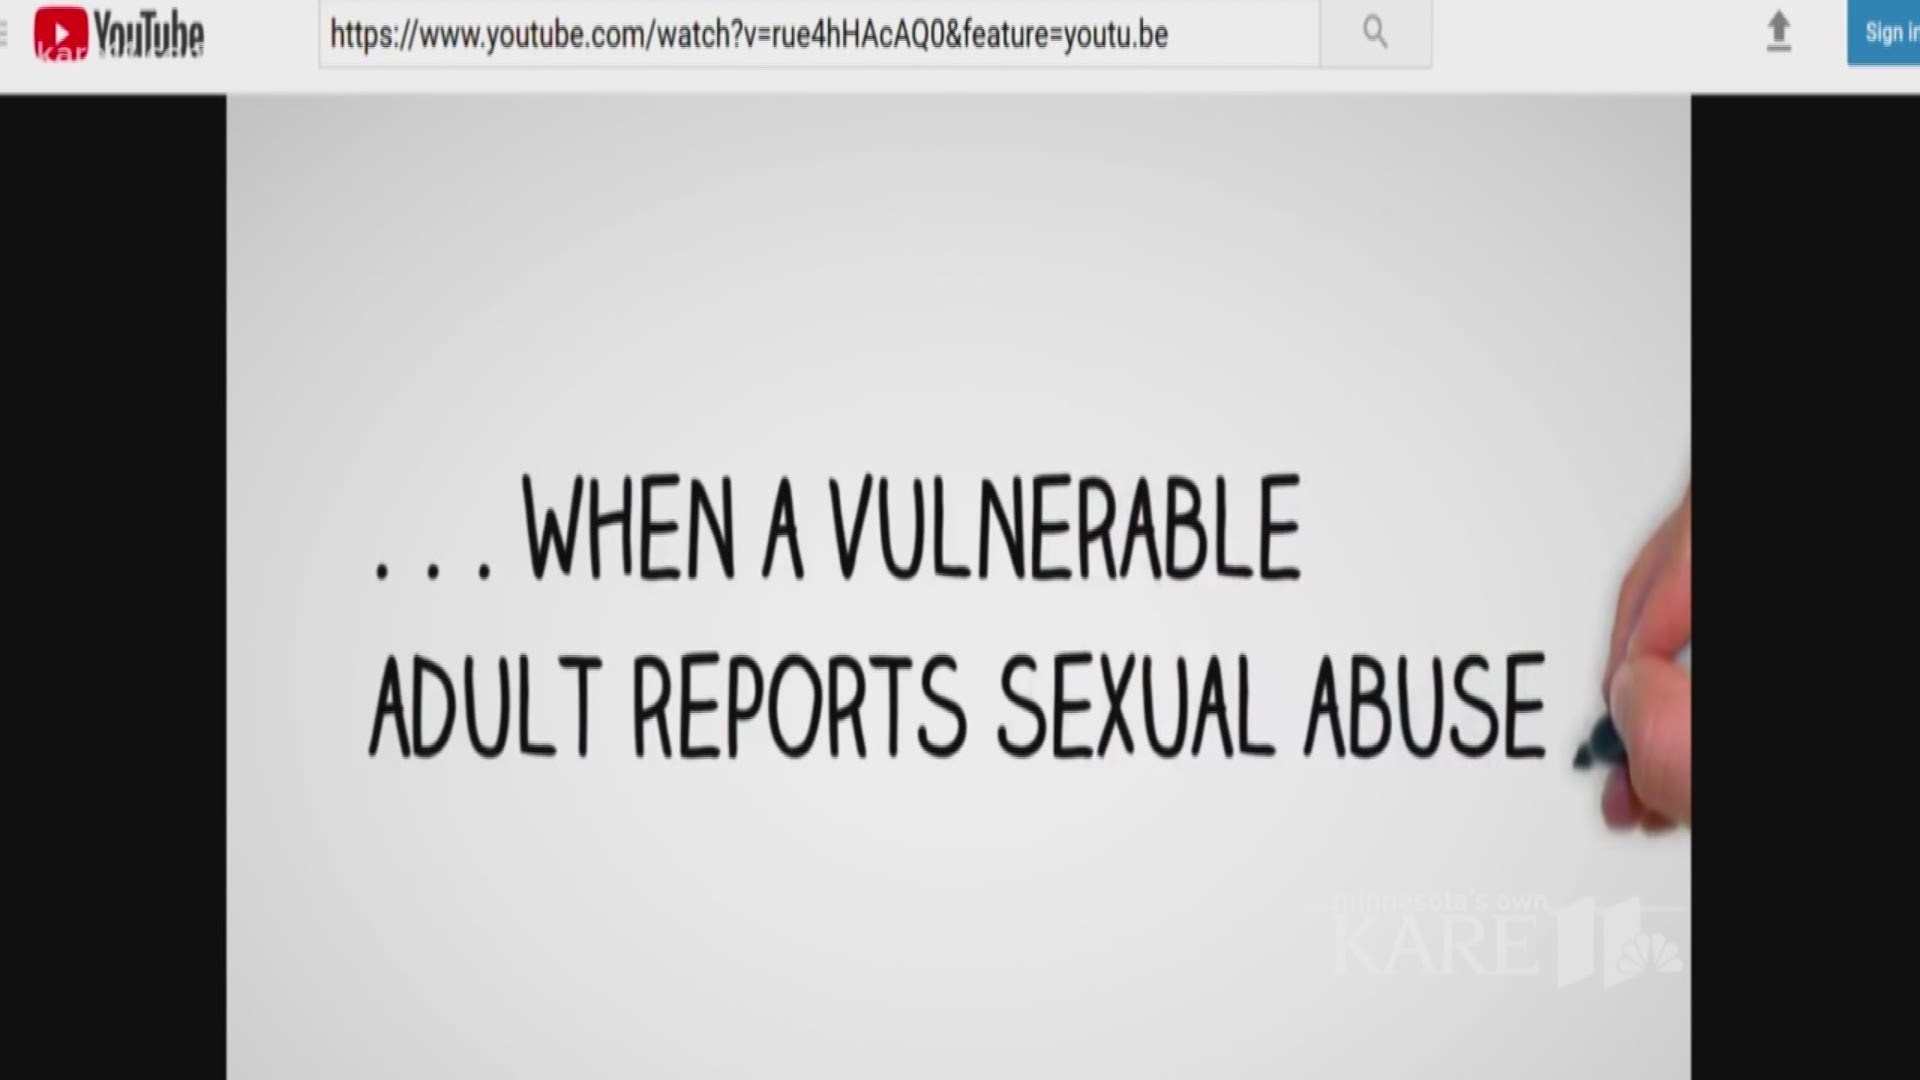 People with intellectual disabilities are sexually assaulted at a rate seven times higher than the general population, yet assaults go undetected and unreported. https://kare11.tv/2Fdk8HF